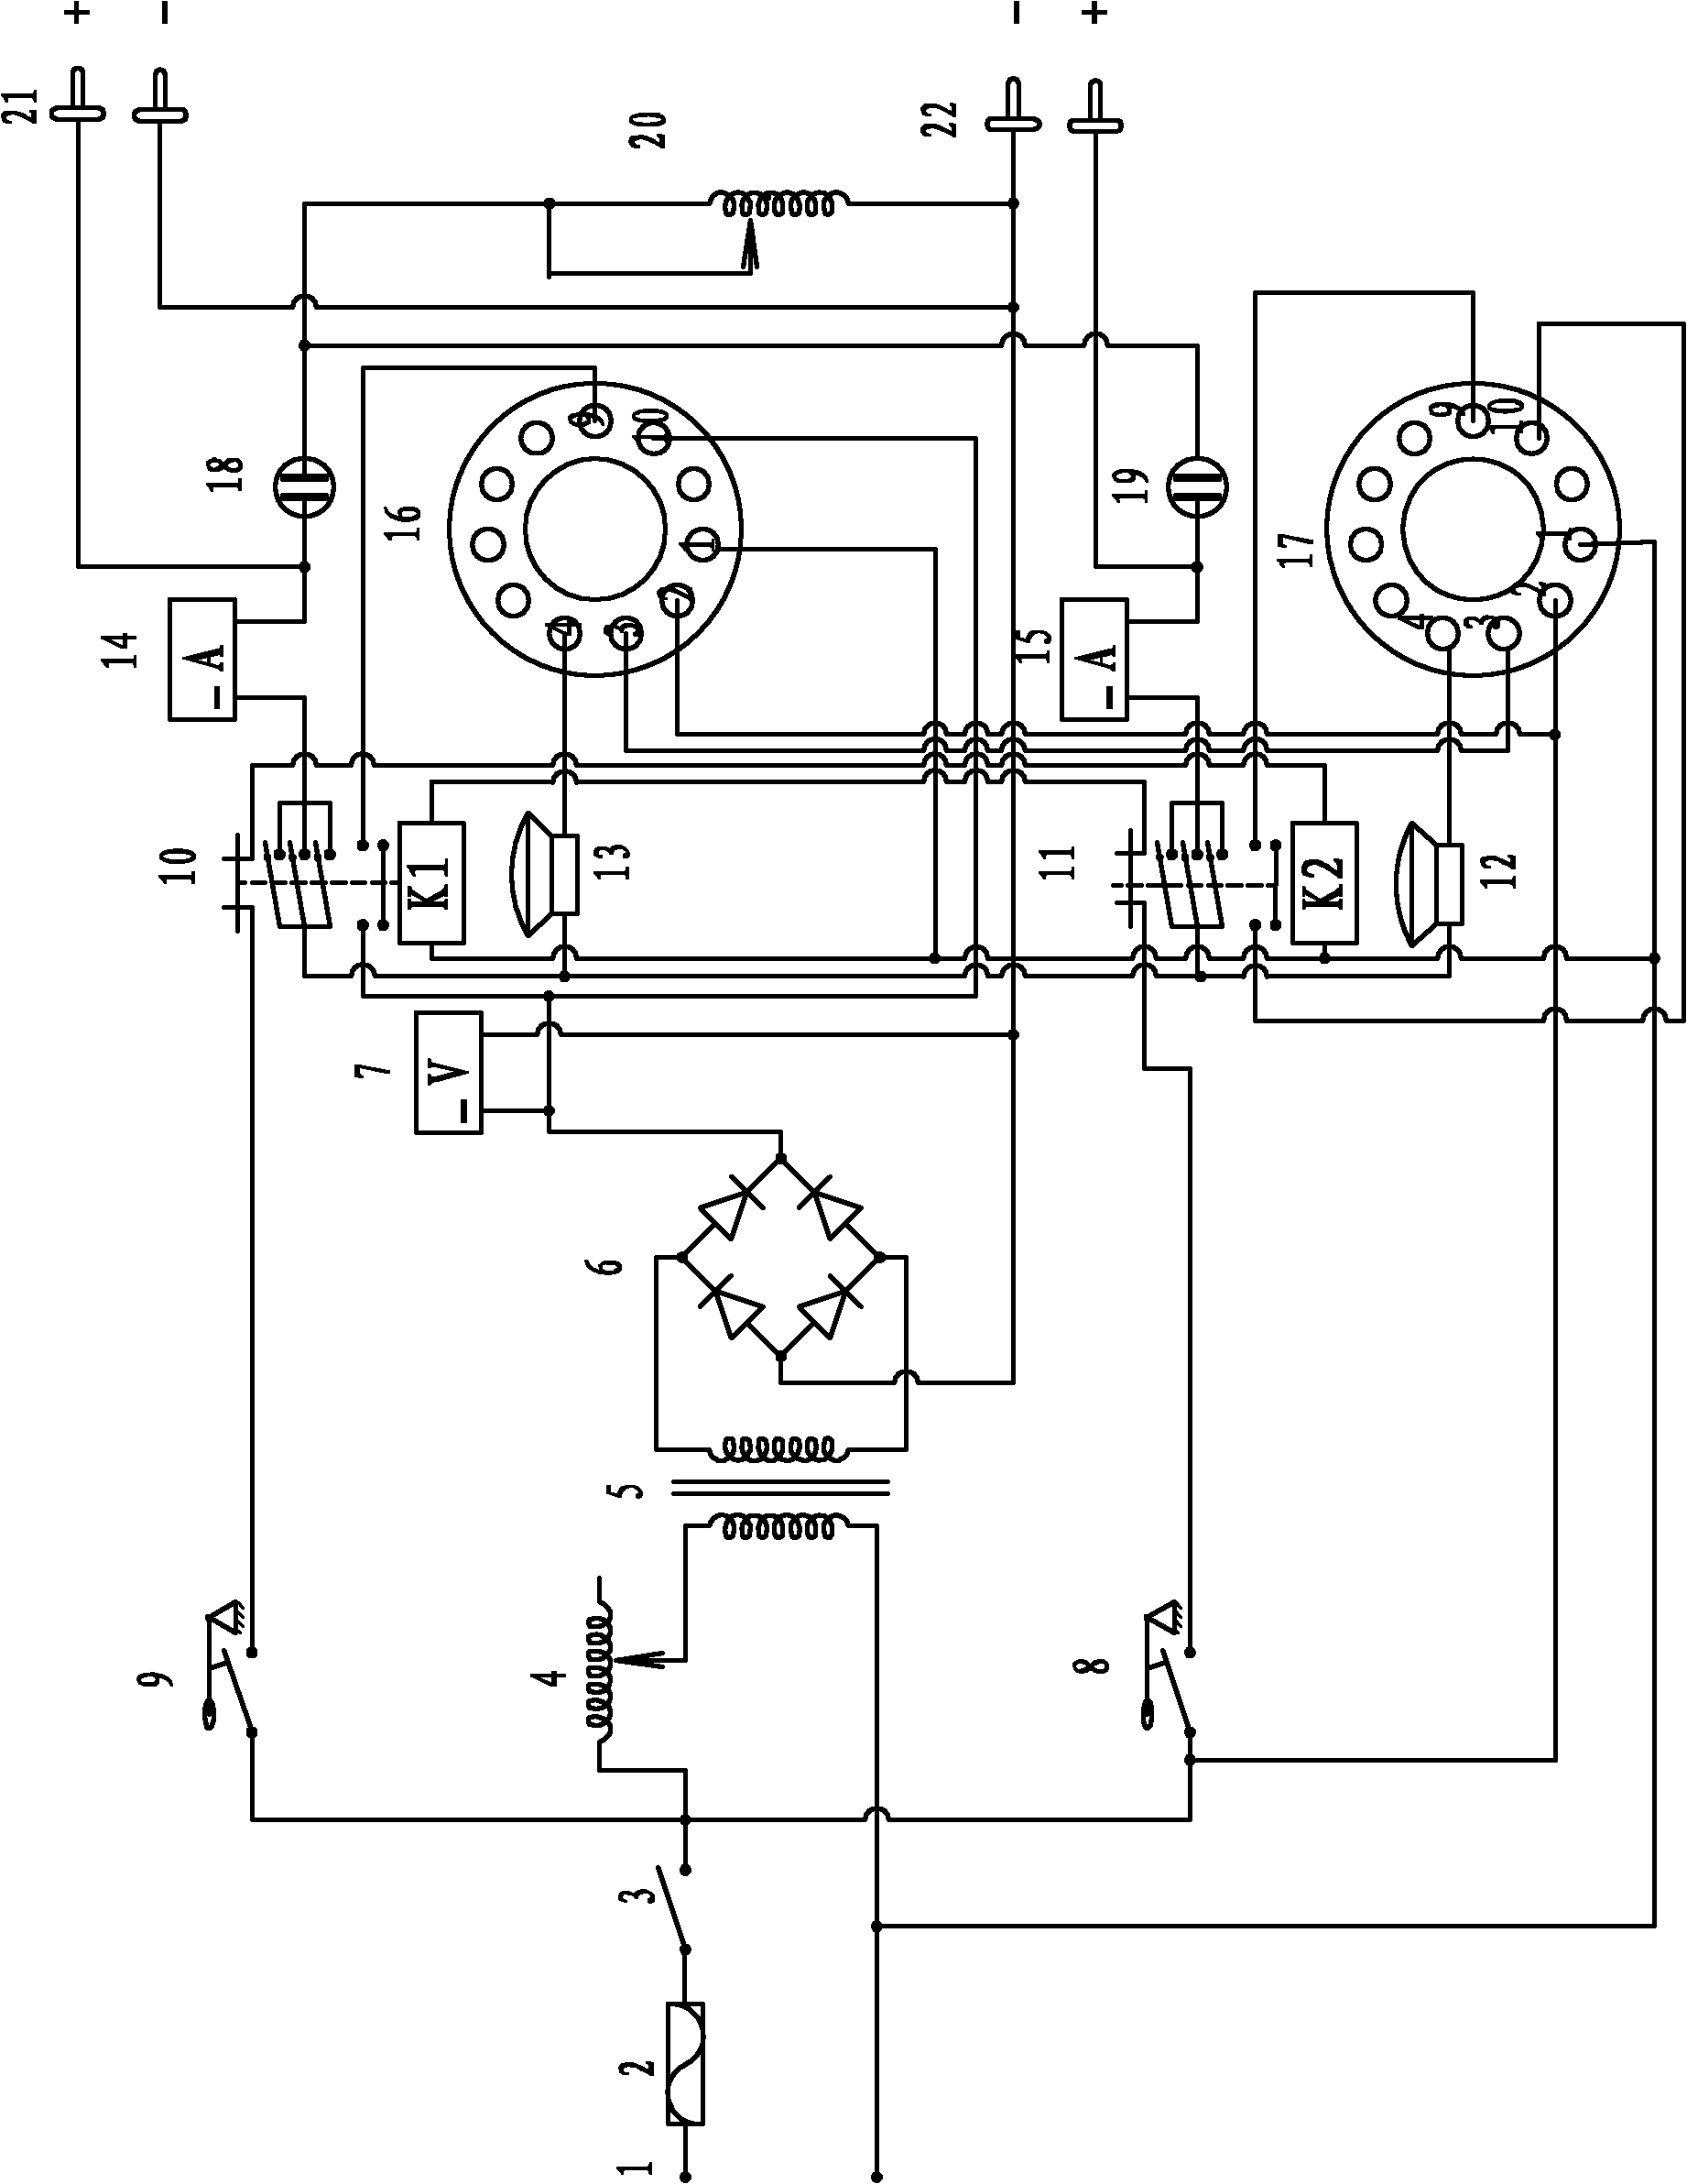 Overcurrent protector detection device